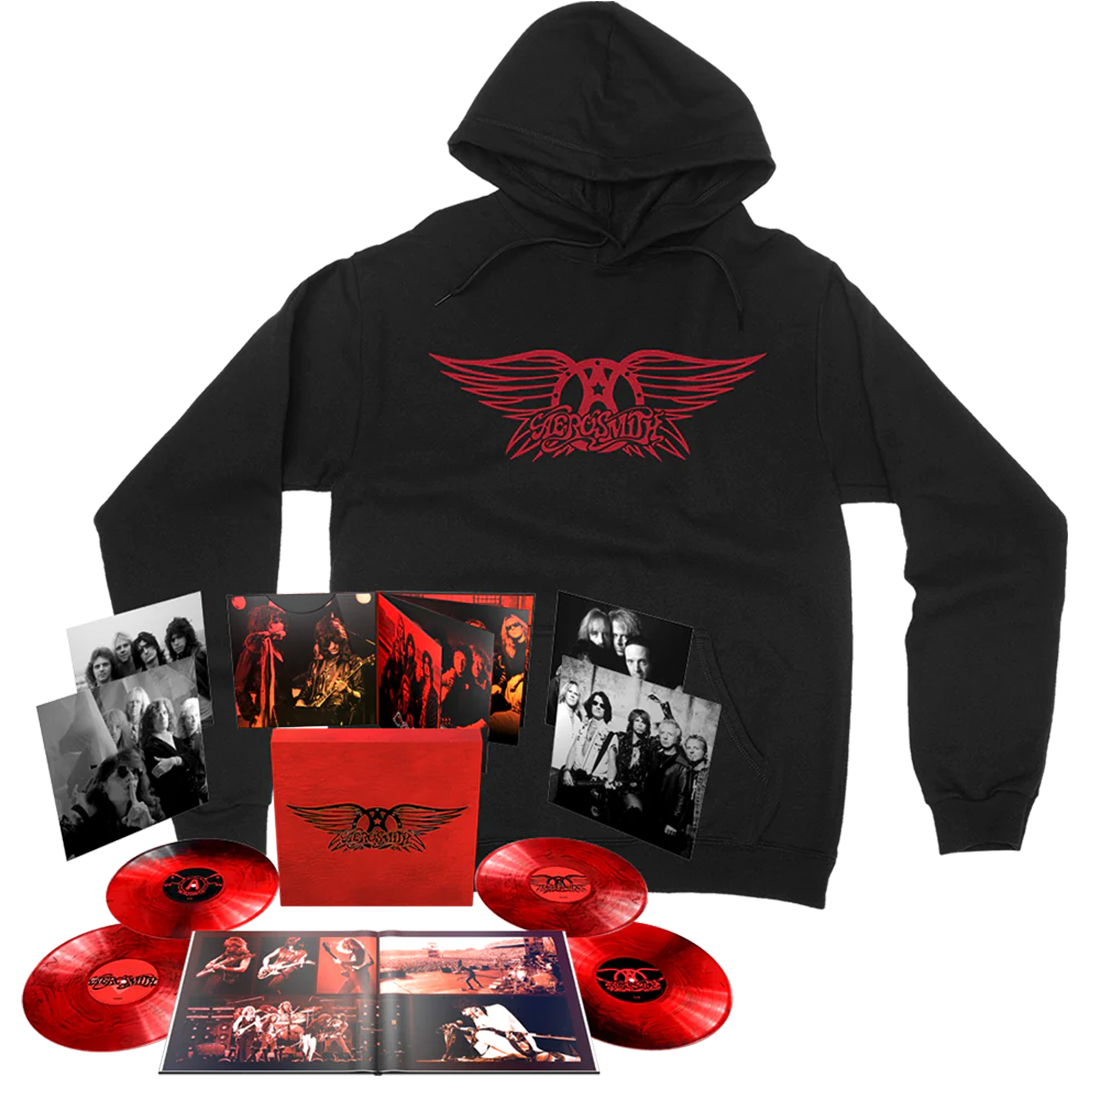 Greatest Hits Super Deluxe 4lp + Greatest Hits Hoodie